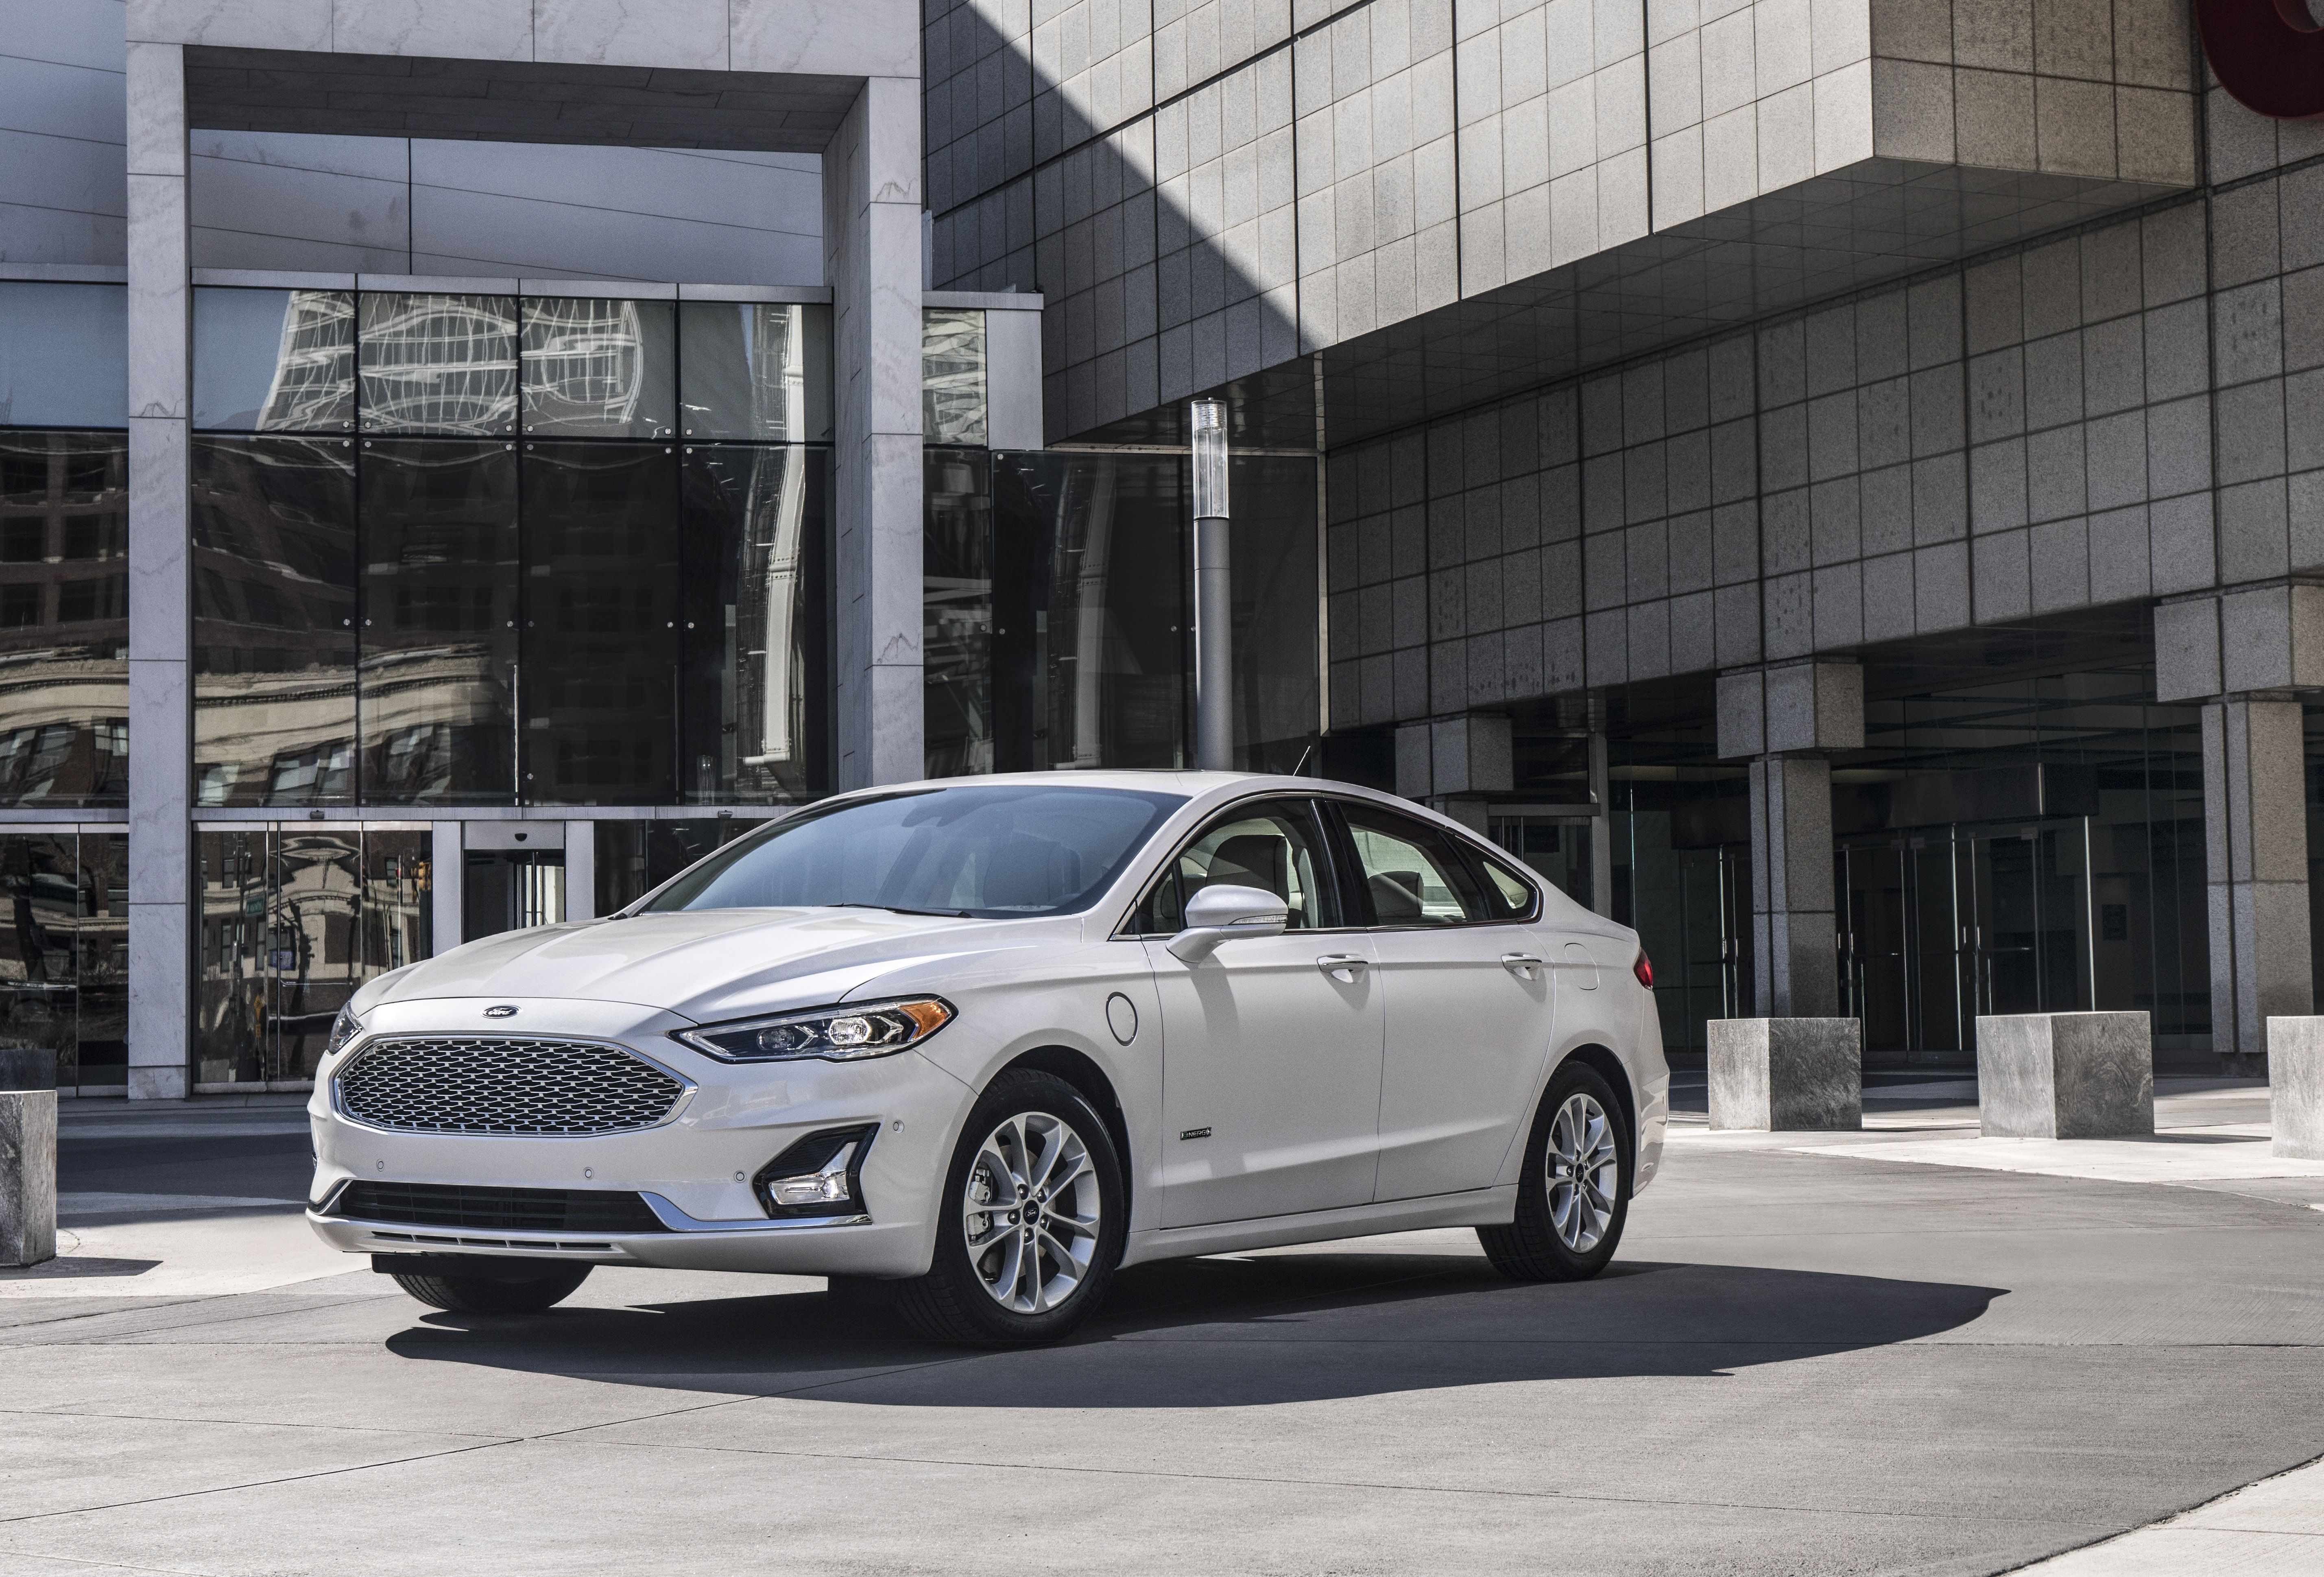 2020 Ford Fusion / Fusion Hybrid Review, Pricing, and Specs